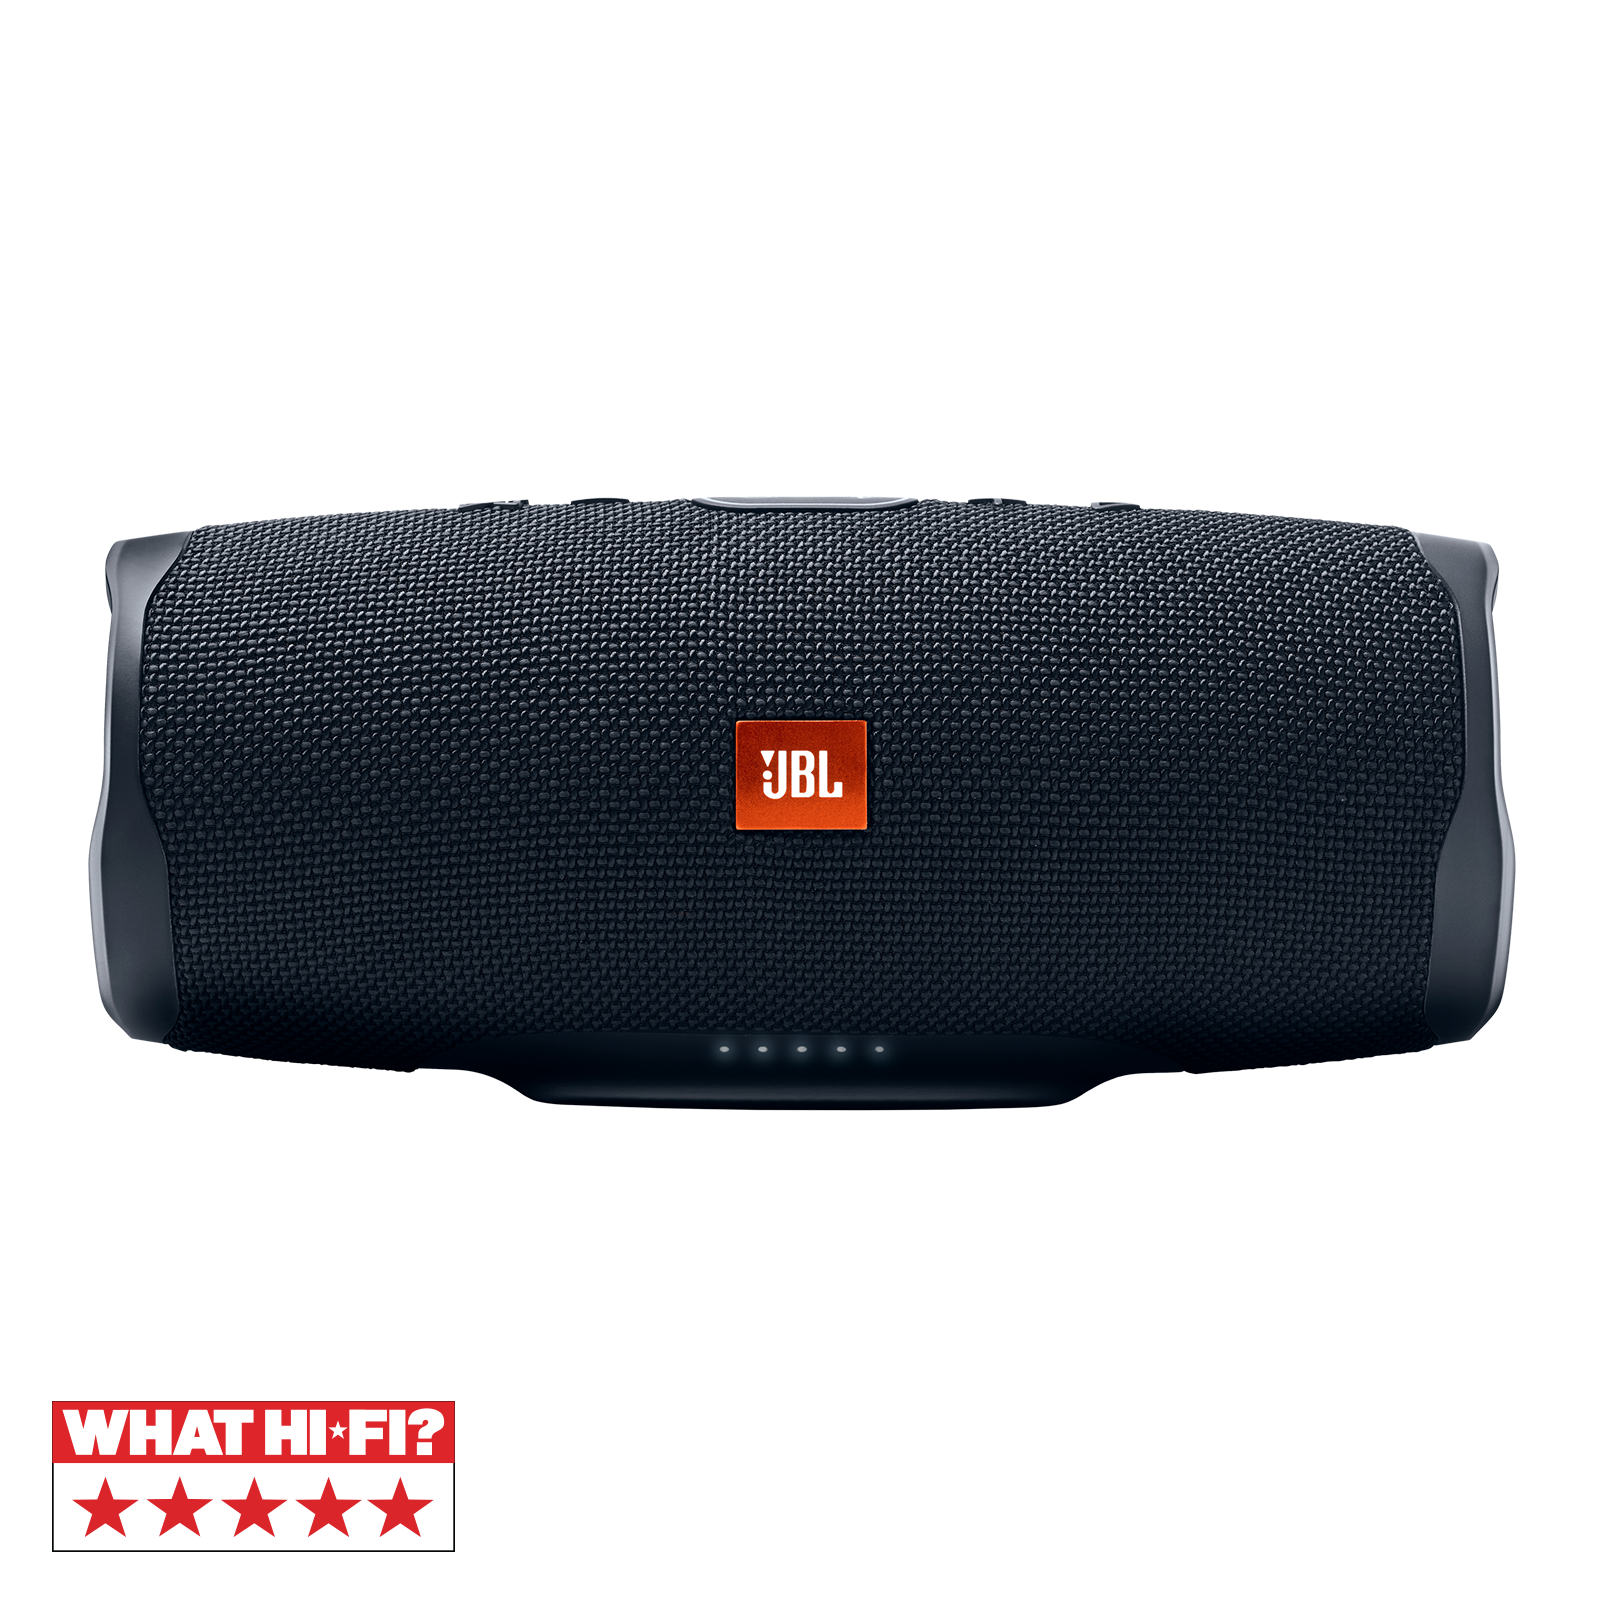 jbl charge 4 connect to charge 3